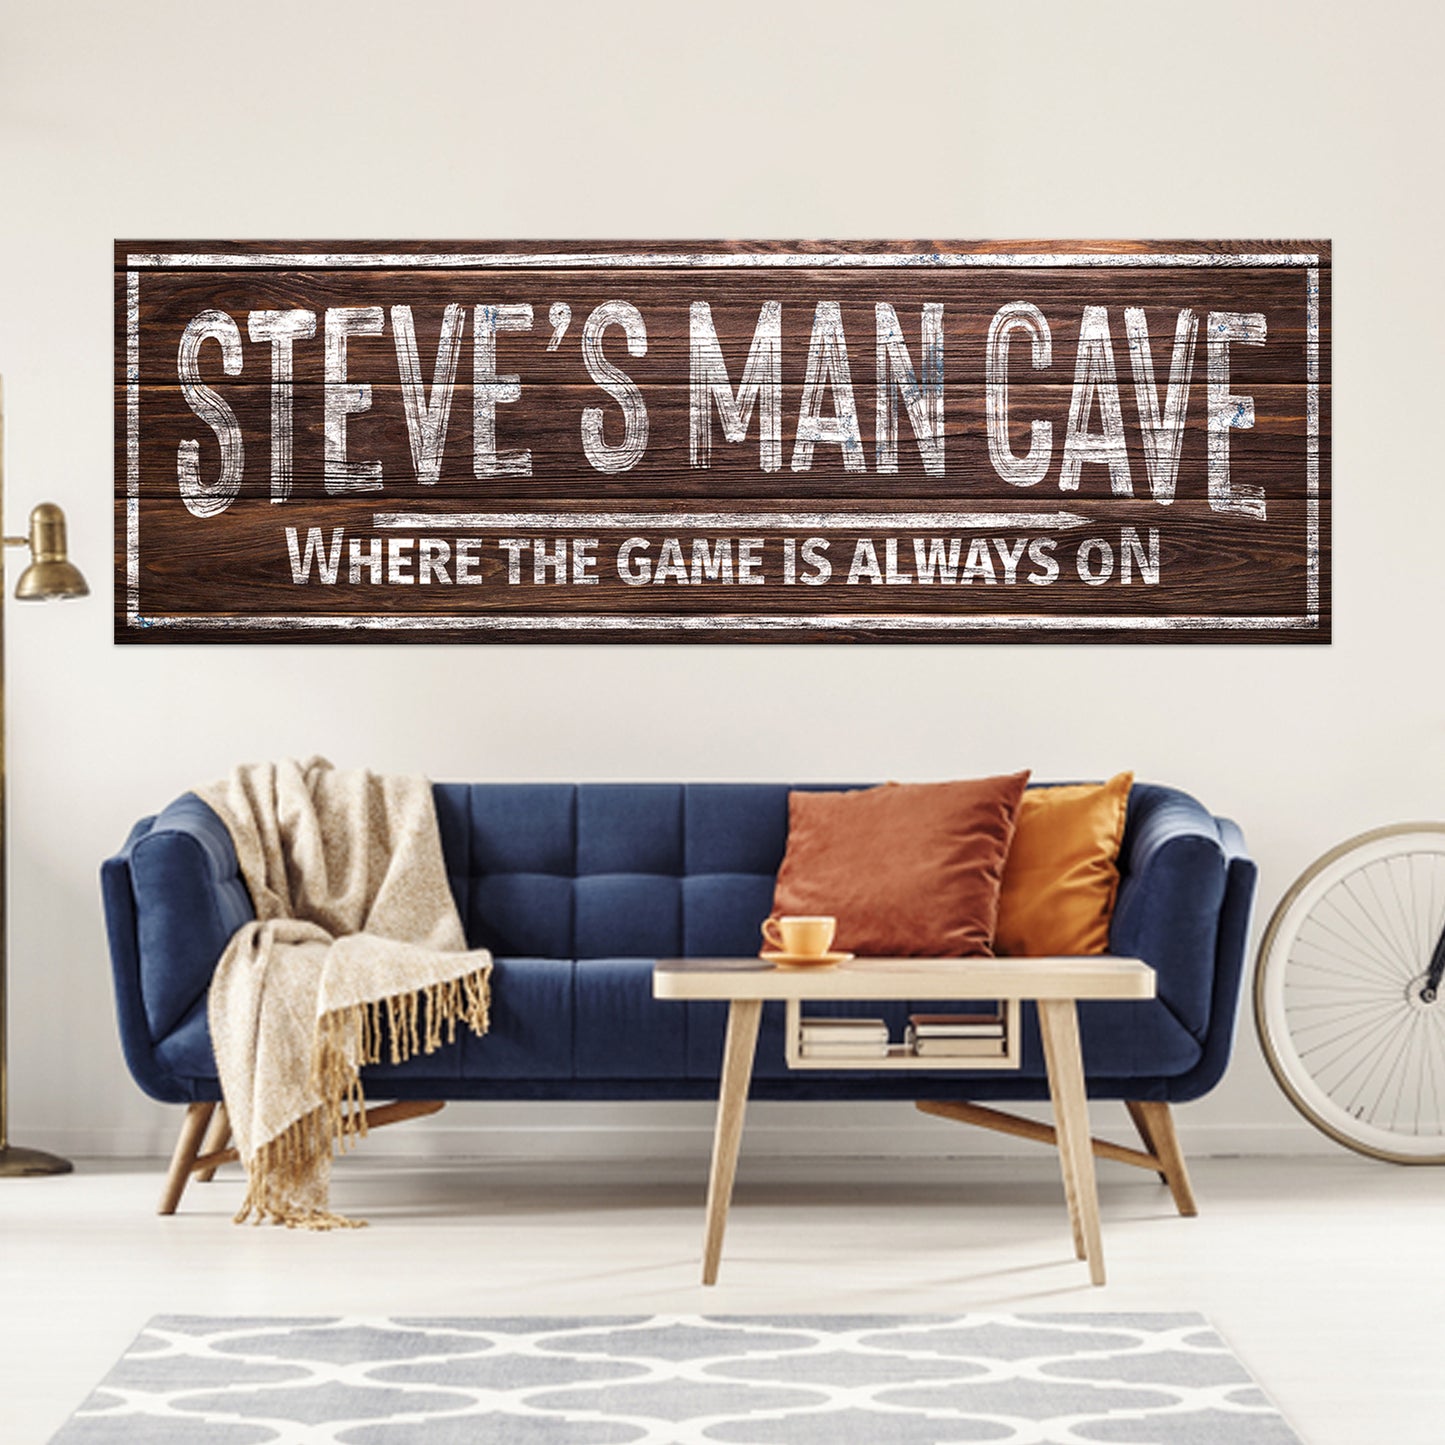 Where the Game is always On Sign Style 2 - Image by Tailored Canvases